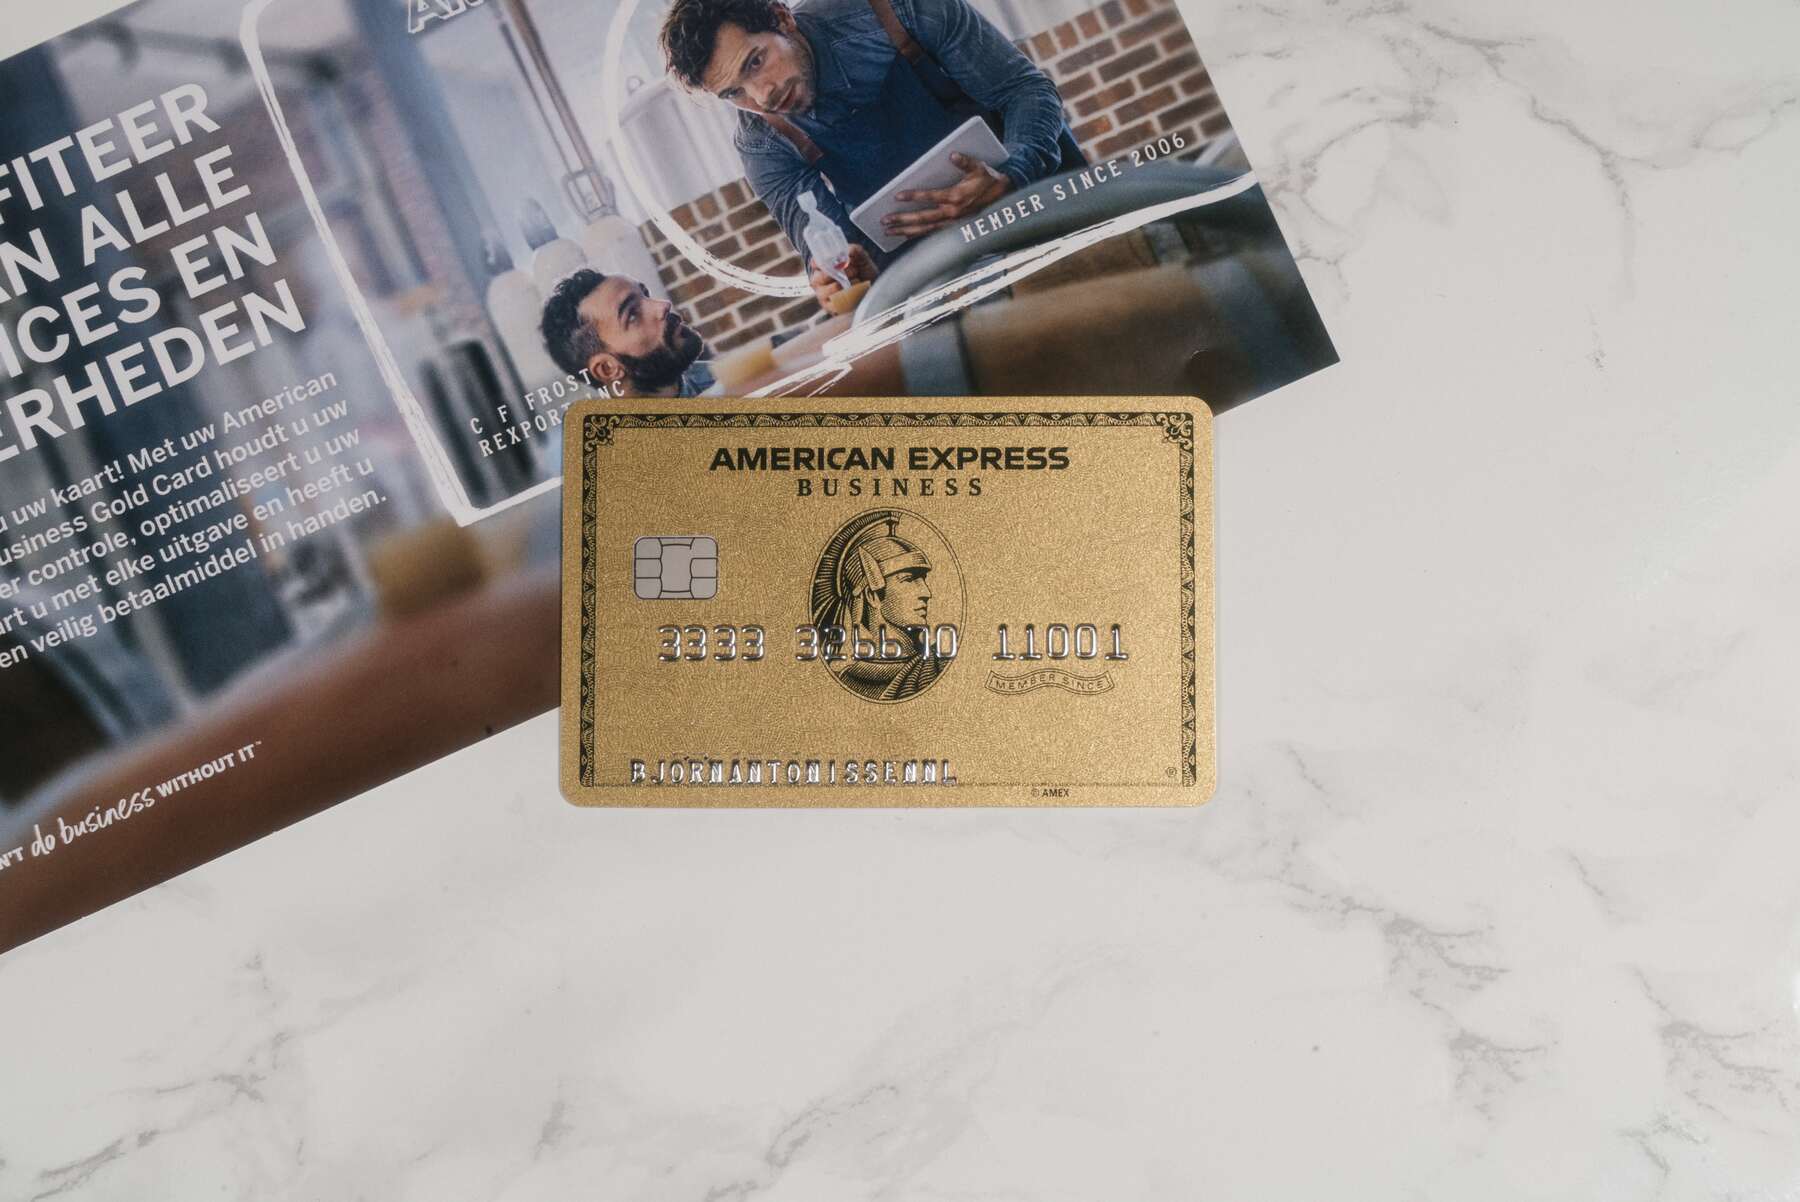 American Express Business card